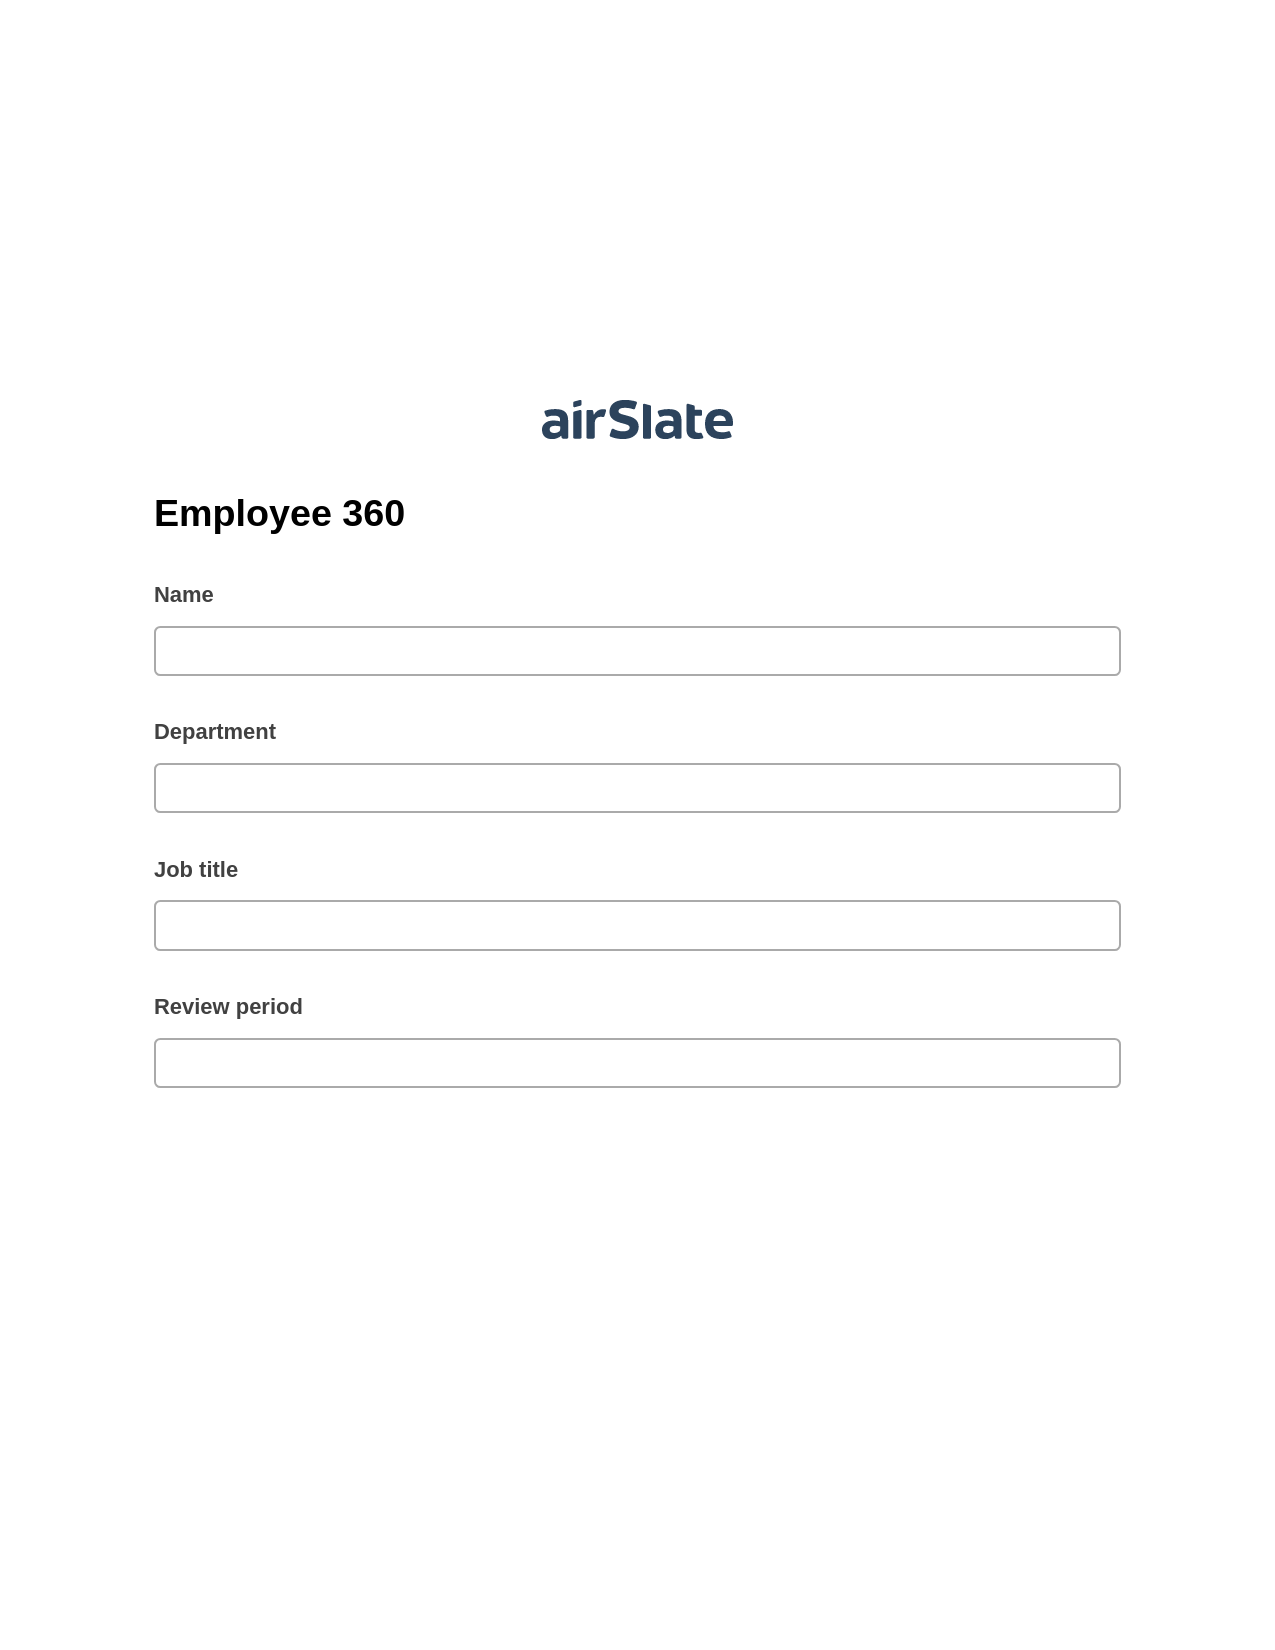 Employee 360 Pre-fill from MySQL Bot, Create MS Dynamics 365 Records Bot, Archive to SharePoint Folder Bot